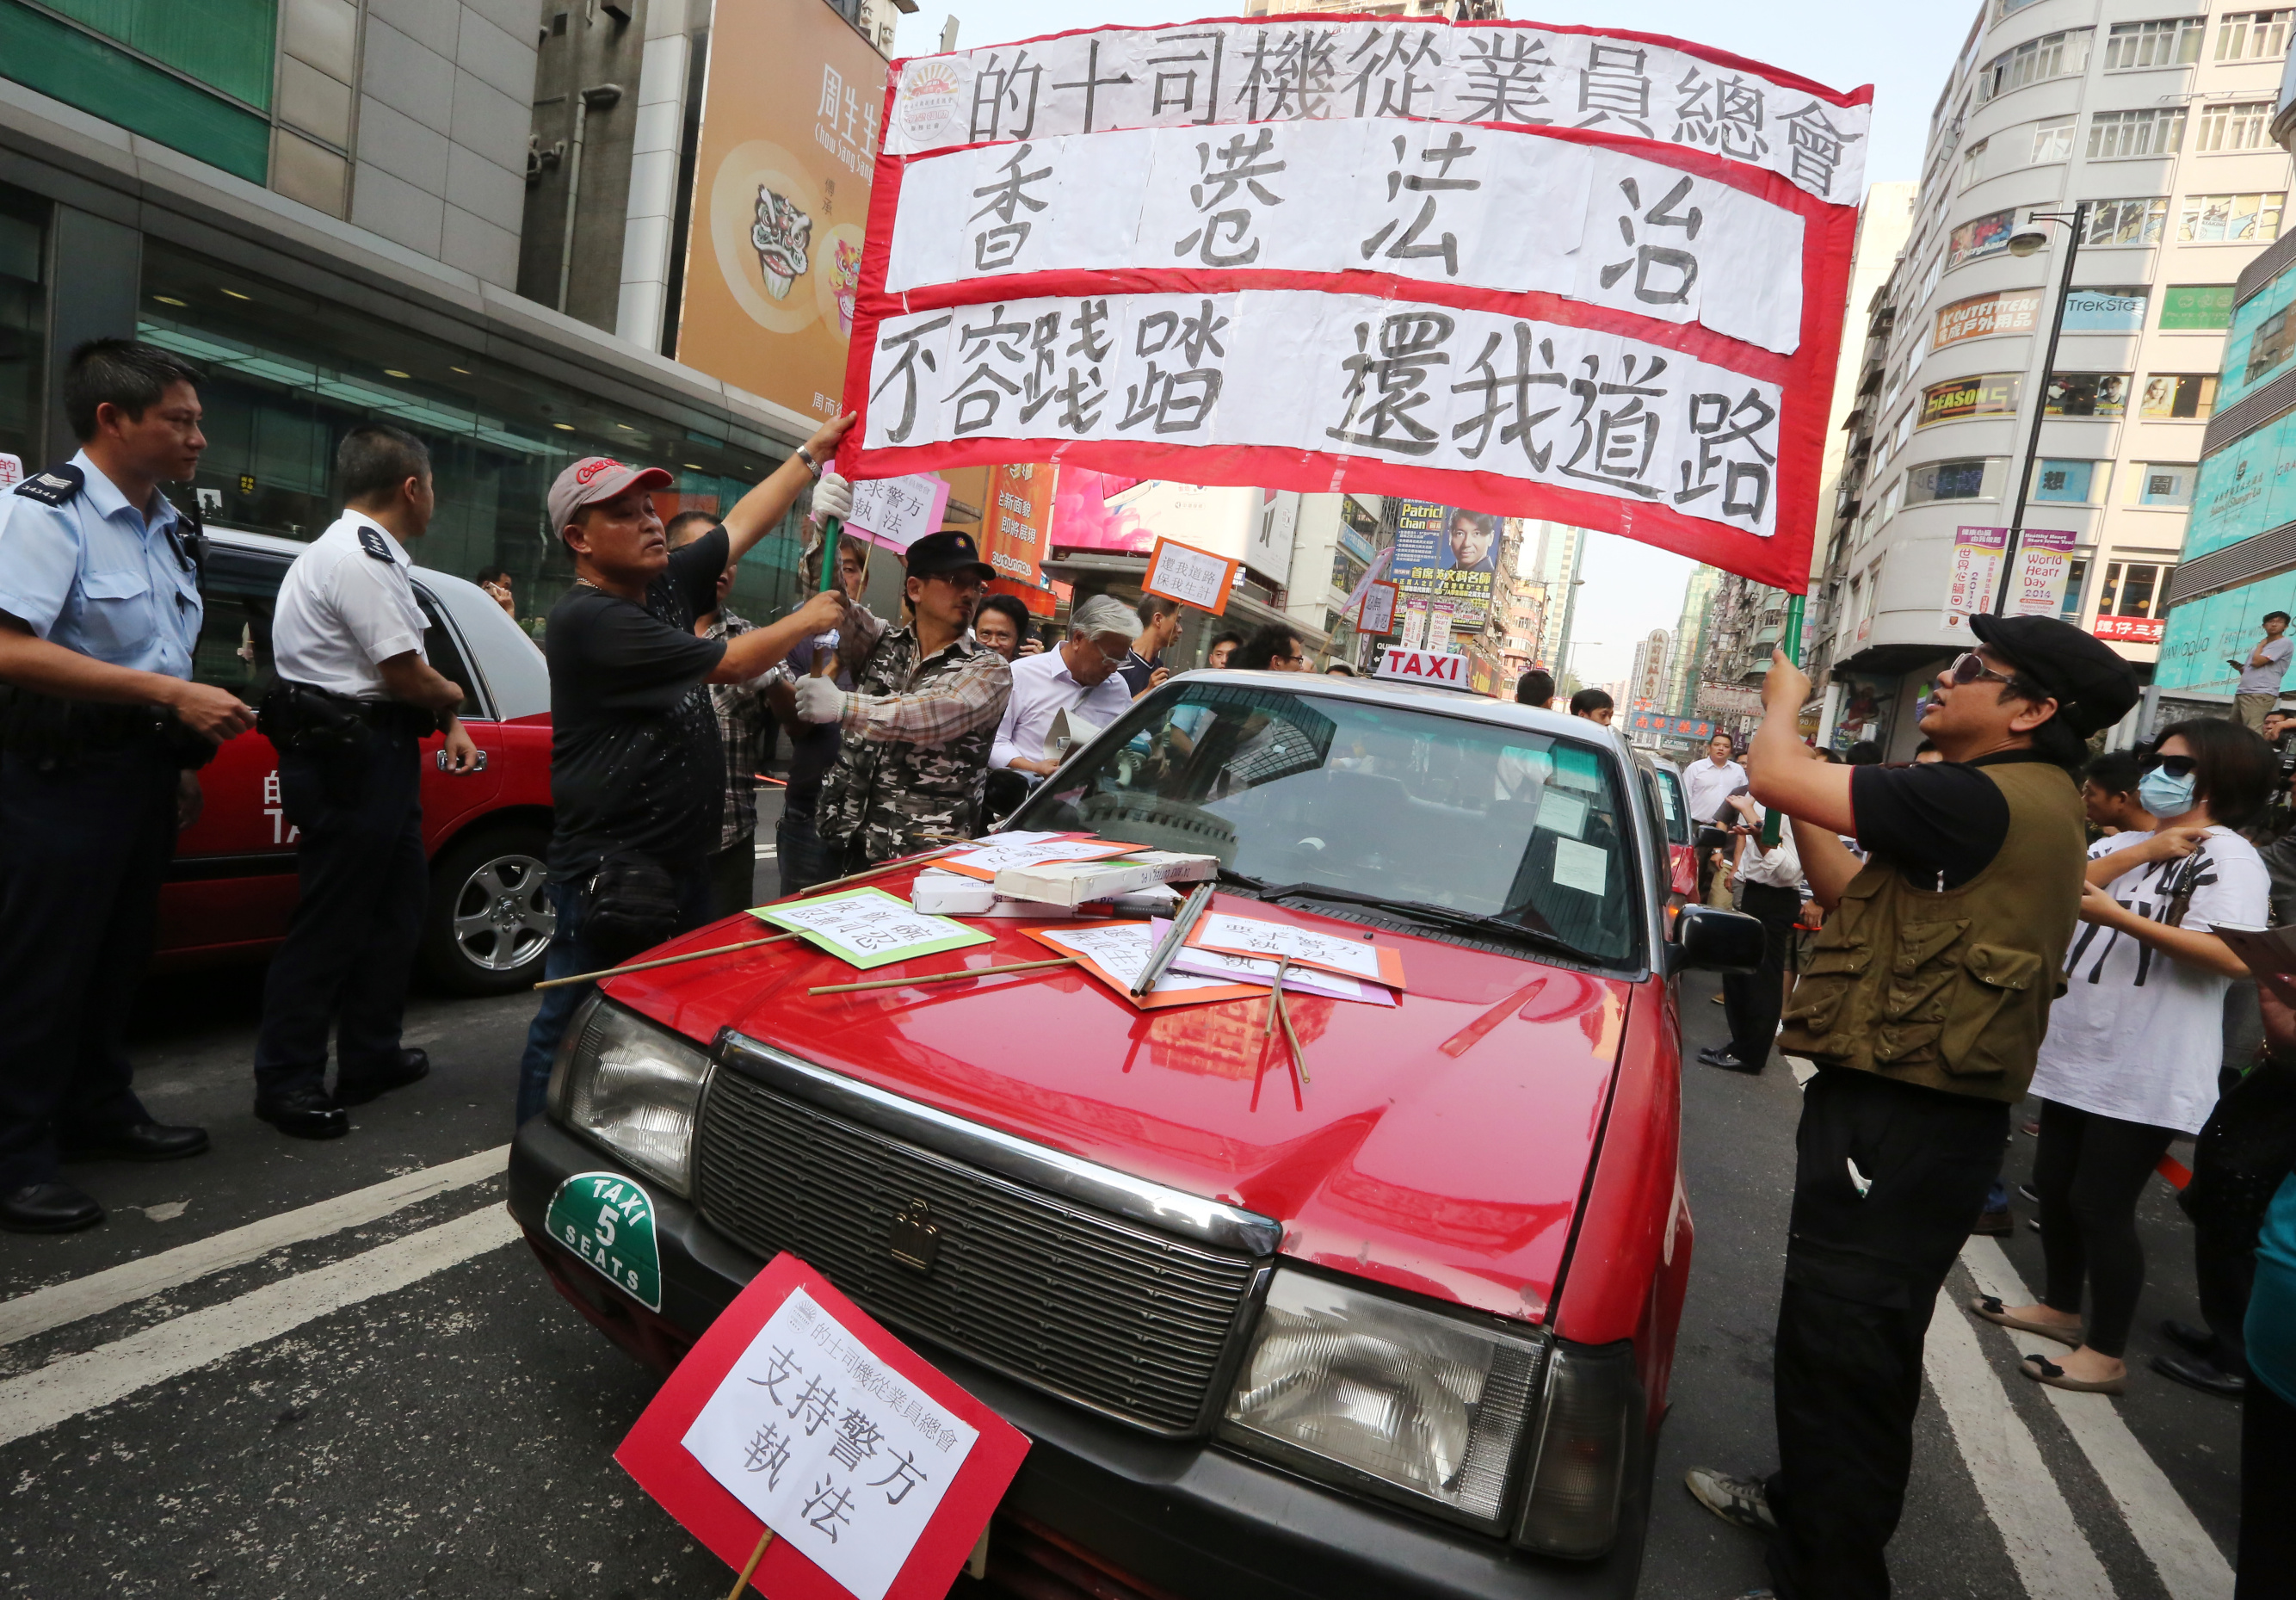 Taxi drivers protest against Occupy protesters in Mong Kok on October 22, 2014. Photo: Felix Wong